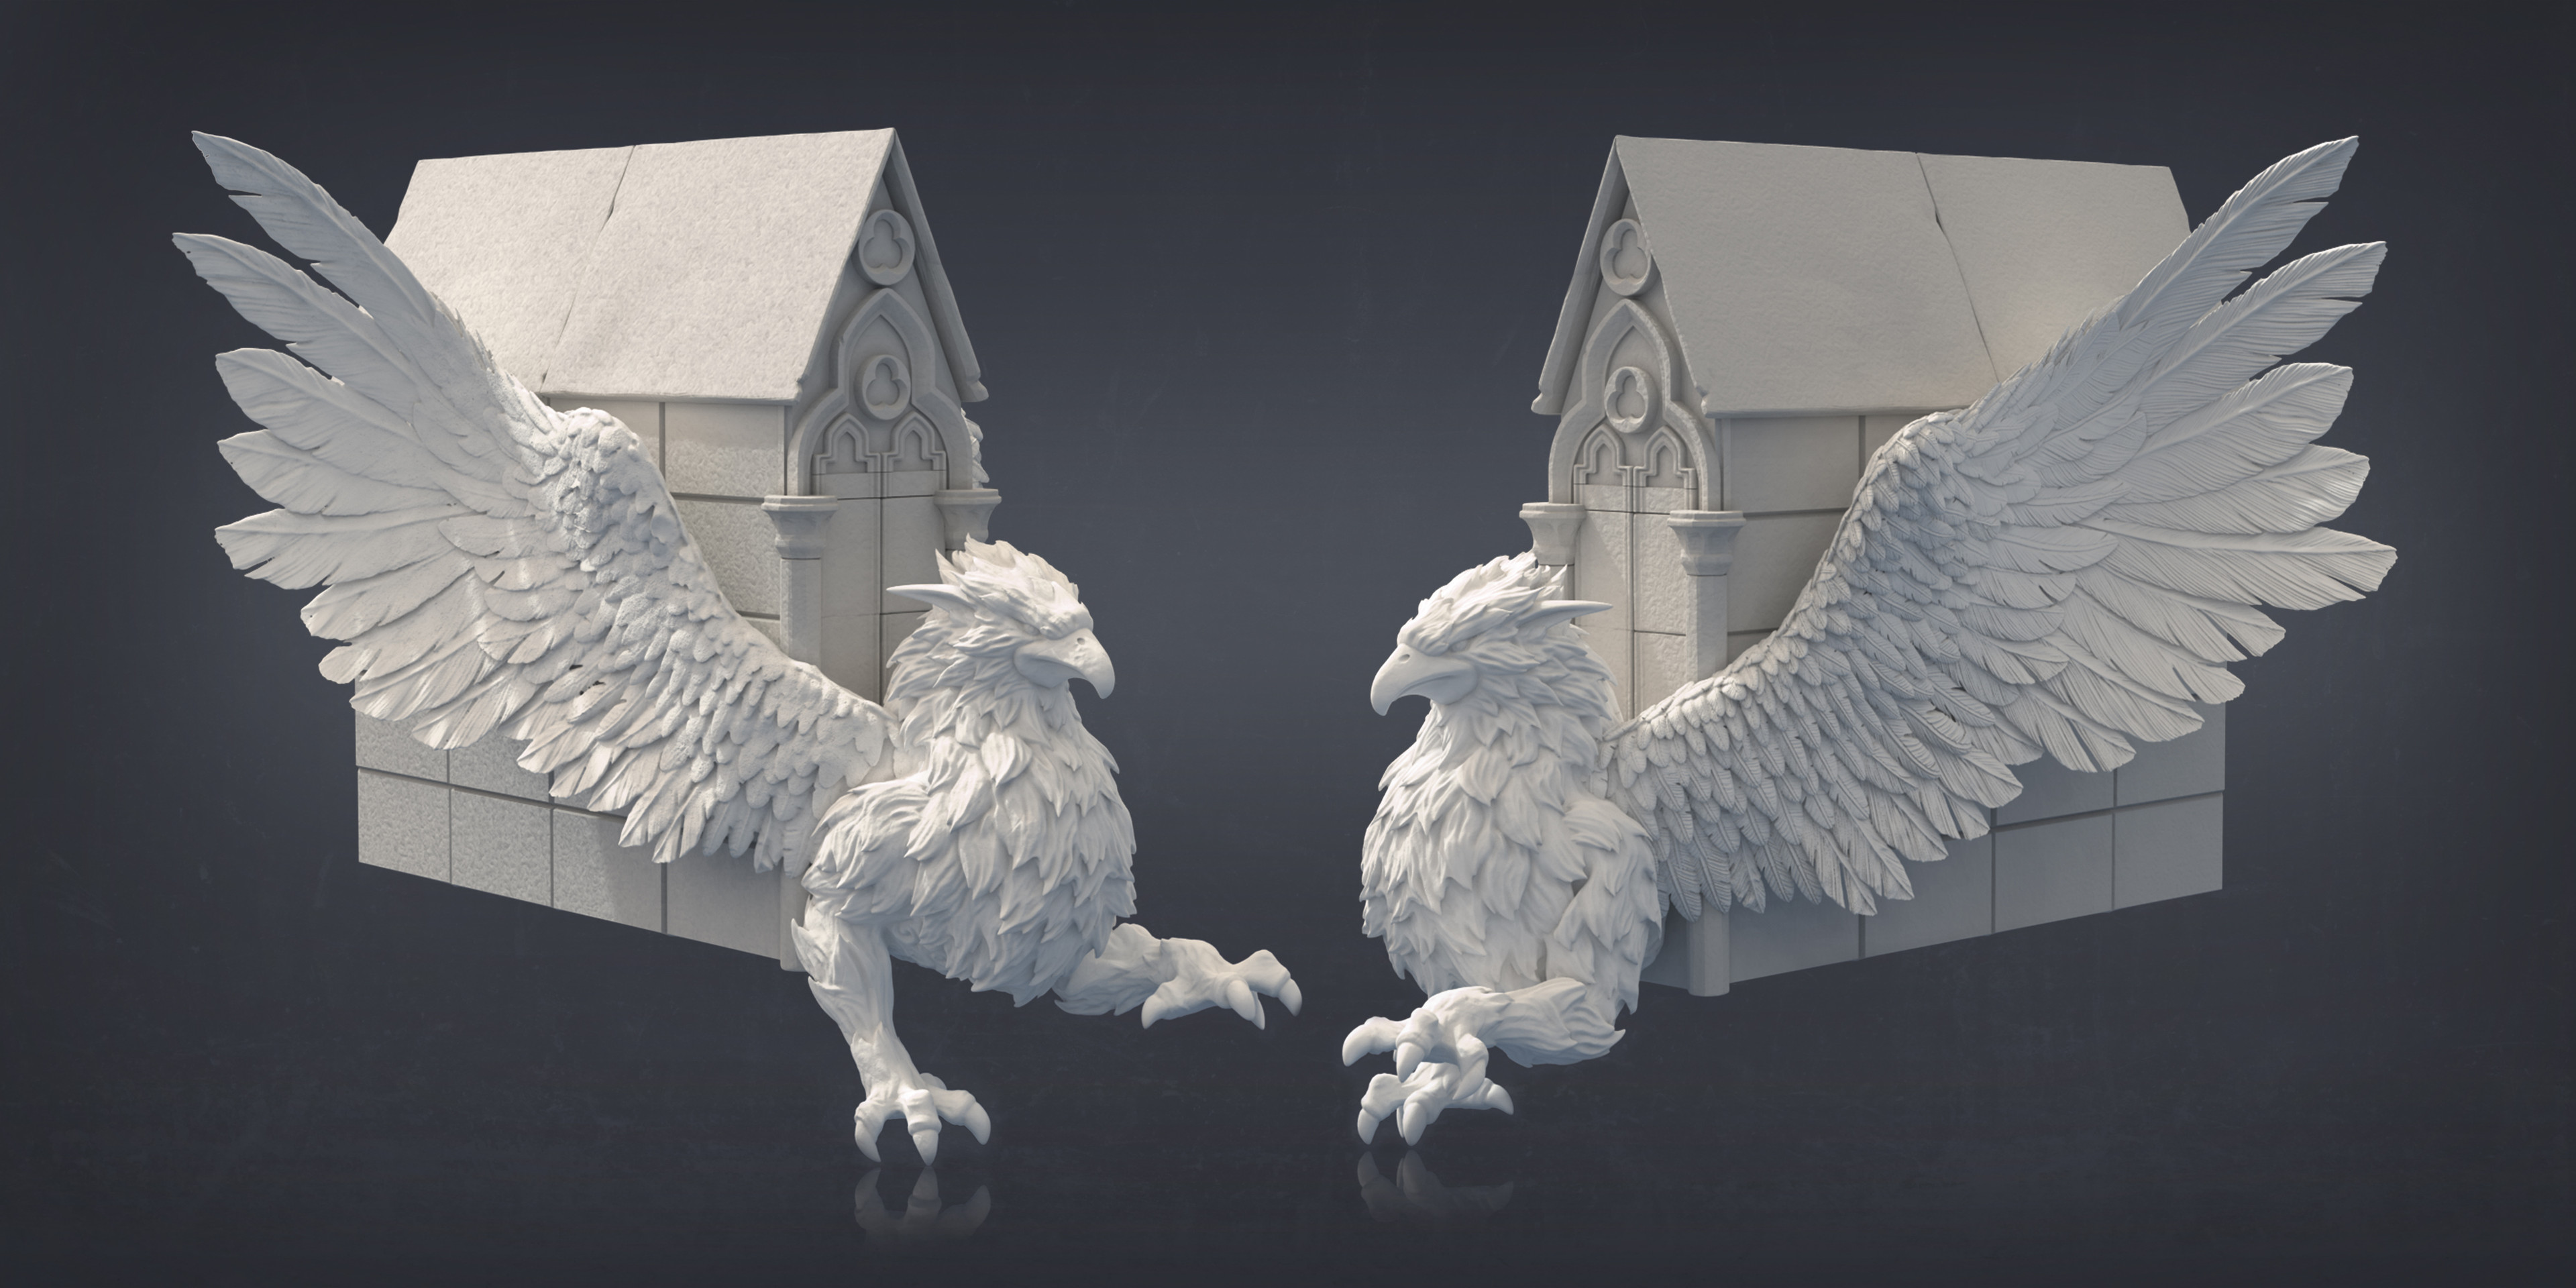 Griffin statue created for a environment scene, the idea was to have this on either side of a entrance. Not sure il return to the full scene at this point.